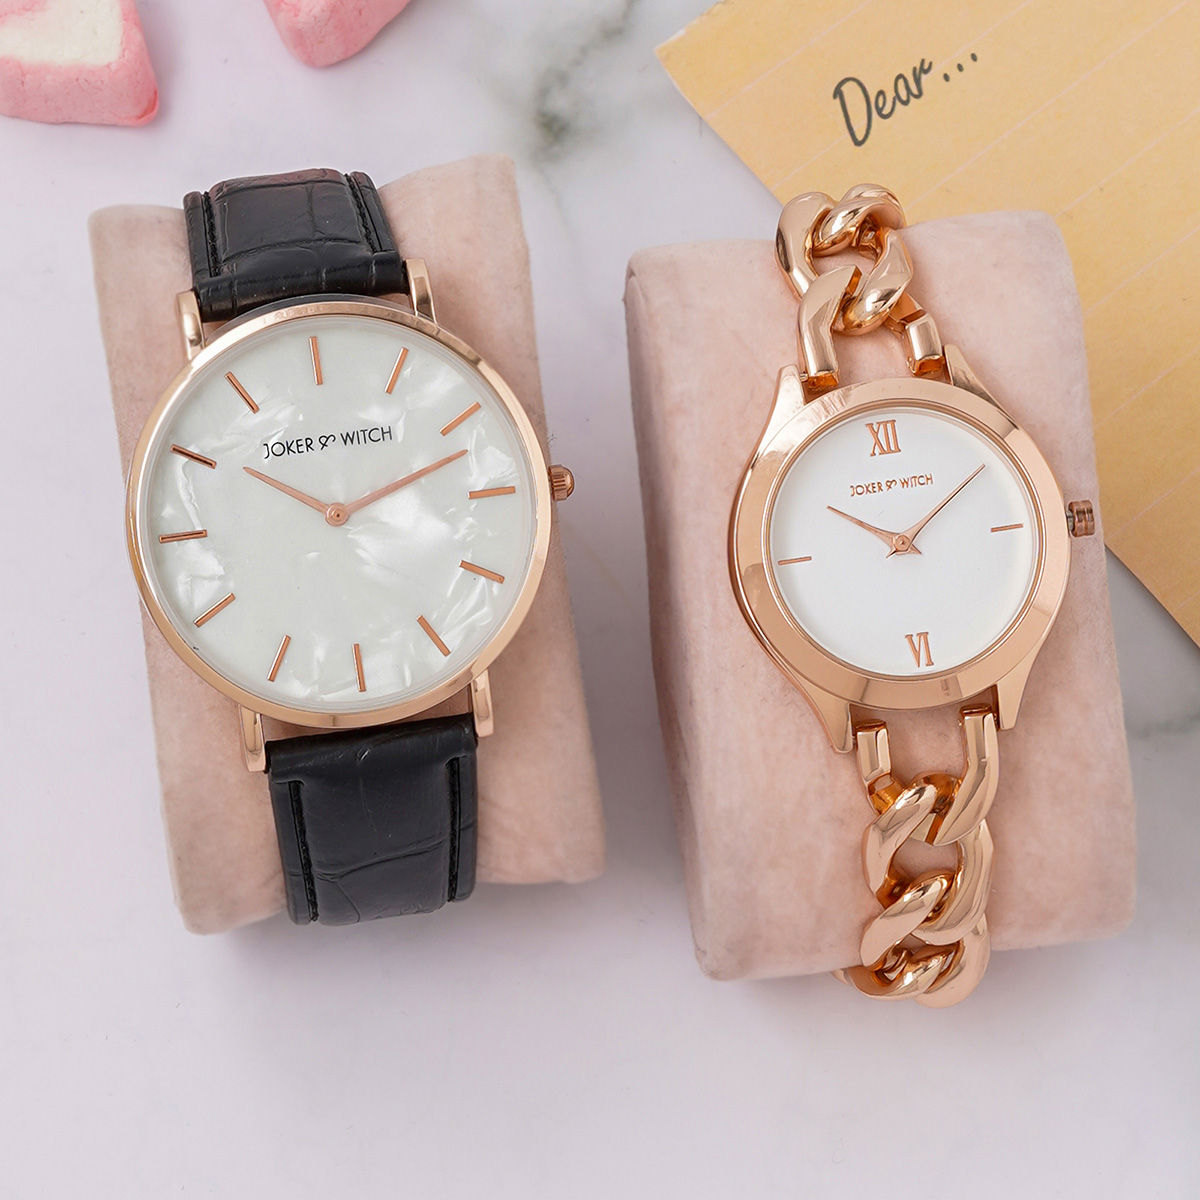 DODO DEER Mens Watch Wood Watches Men Clock Business Luxury Stop Watch  Color Optional With Wood Stainless Steel Band C08 OEM T200815 From 26,67 €  | DHgate